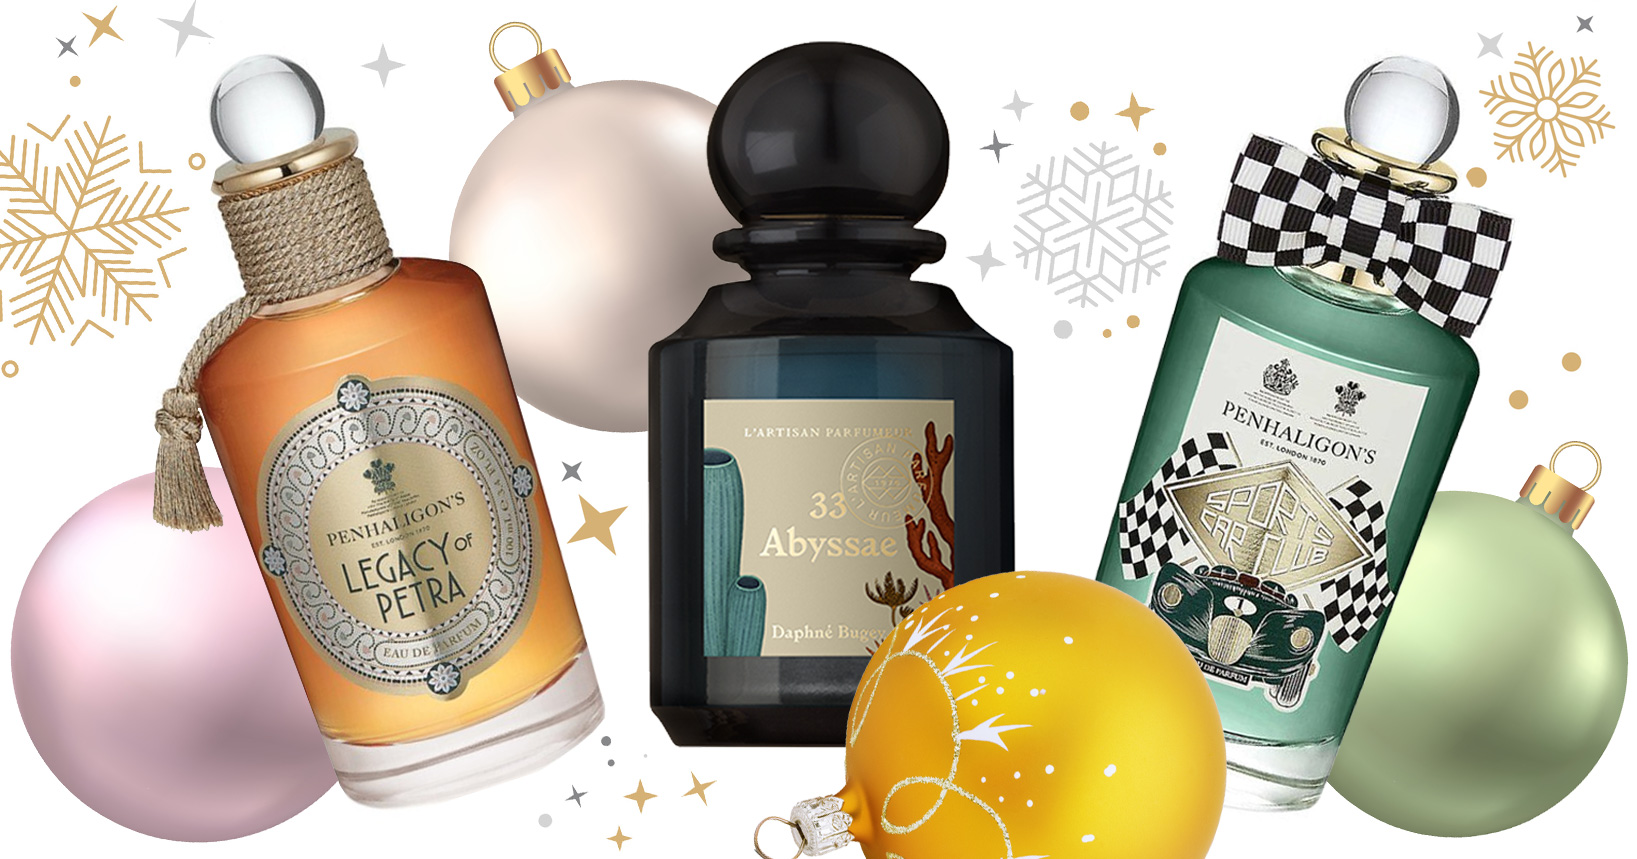 If you want a fragrance that lasts, these extrait de parfums are literally  history making